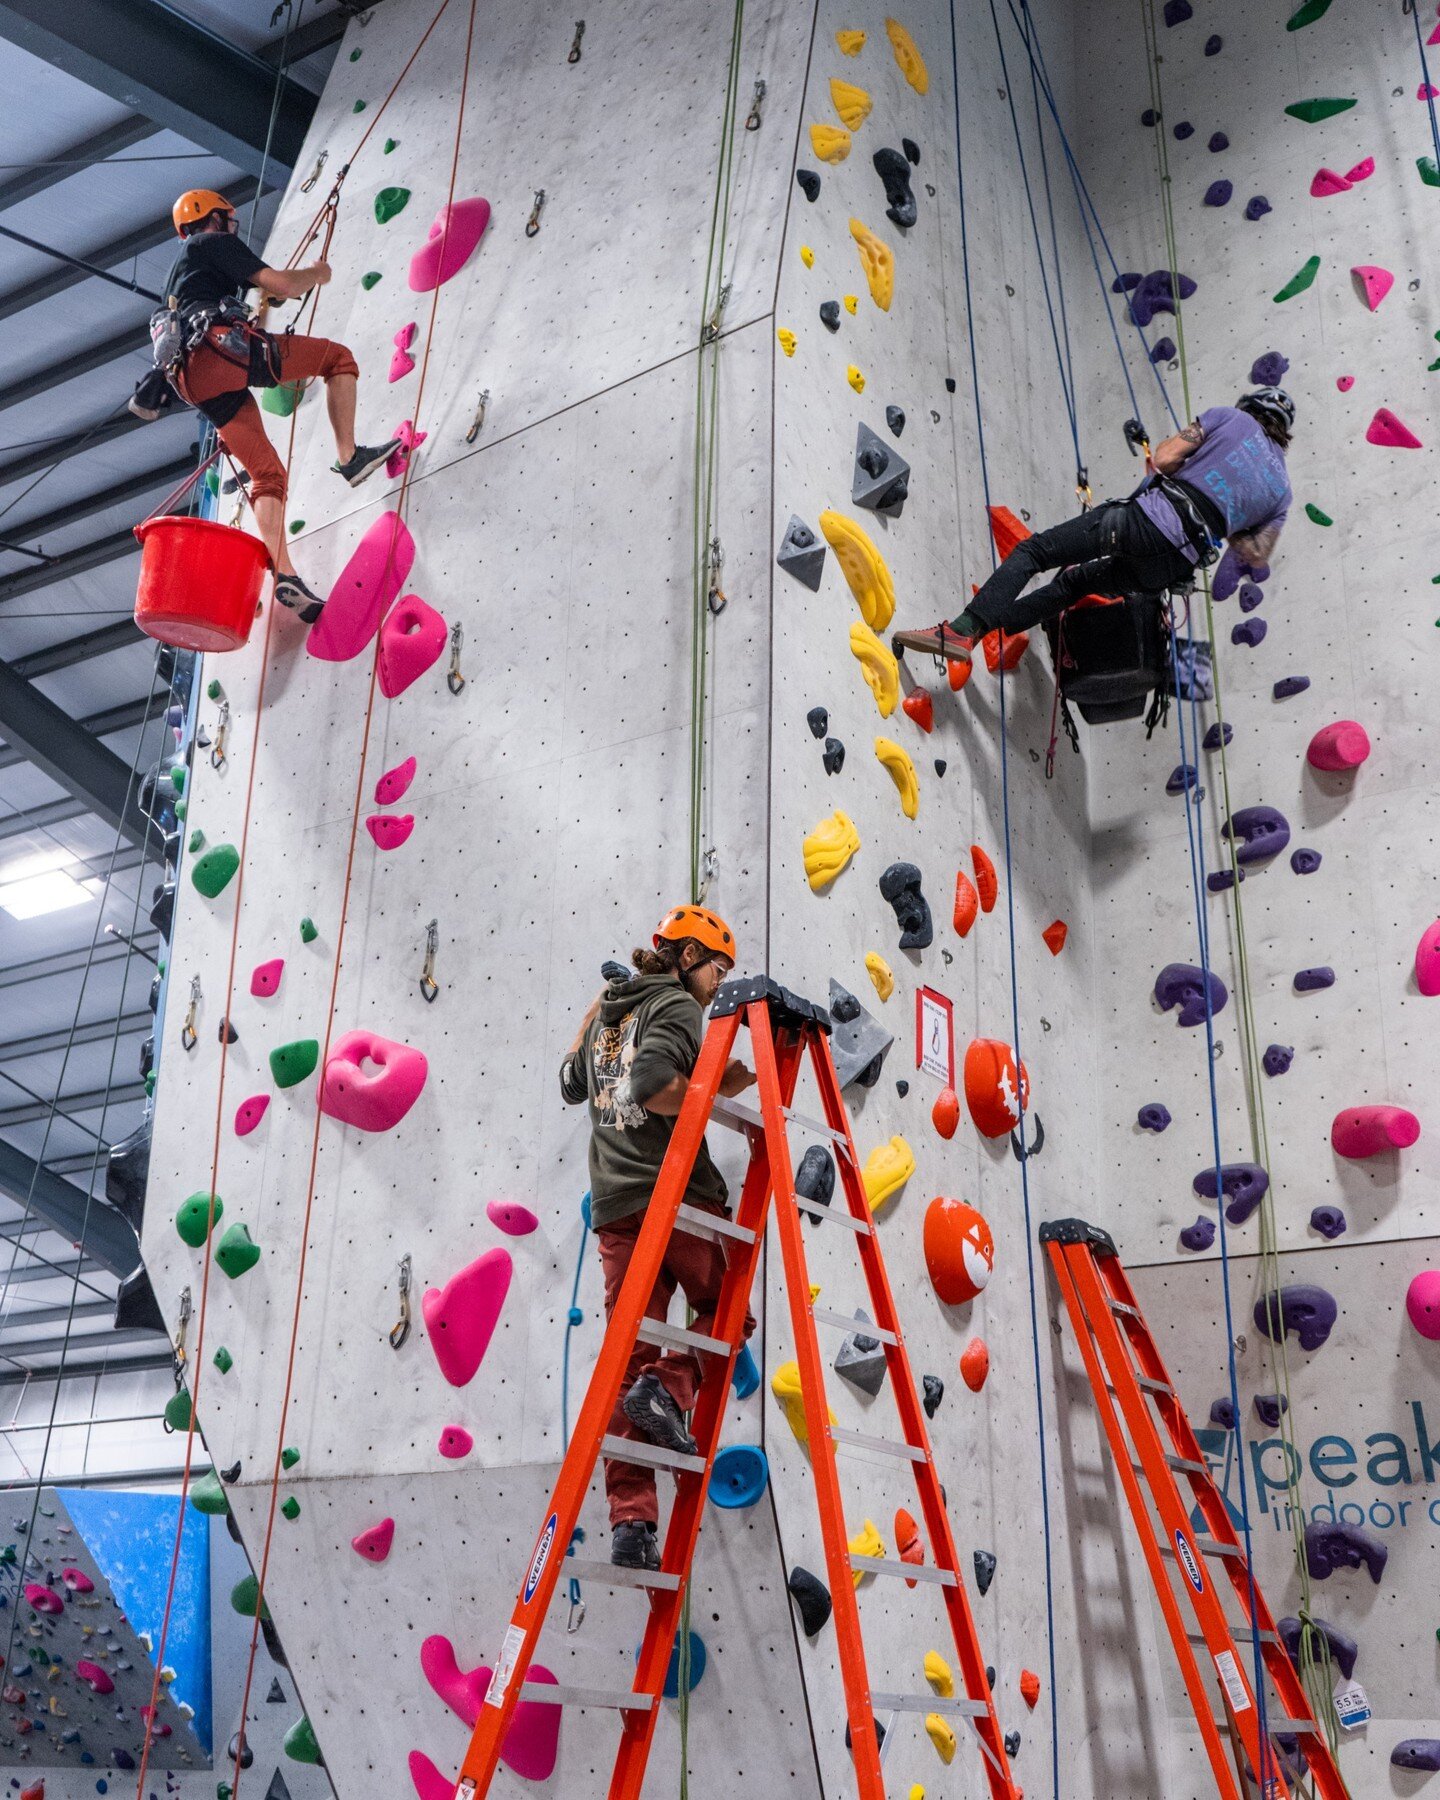 Join our Peak routesetting team for a night of climbing and chatting, next Thursday, Dec 8th at 6pm. Our Head Routesetter, Adam, and others on the team will be climbing with the community and answering questions about routesetting. Come out and meet 